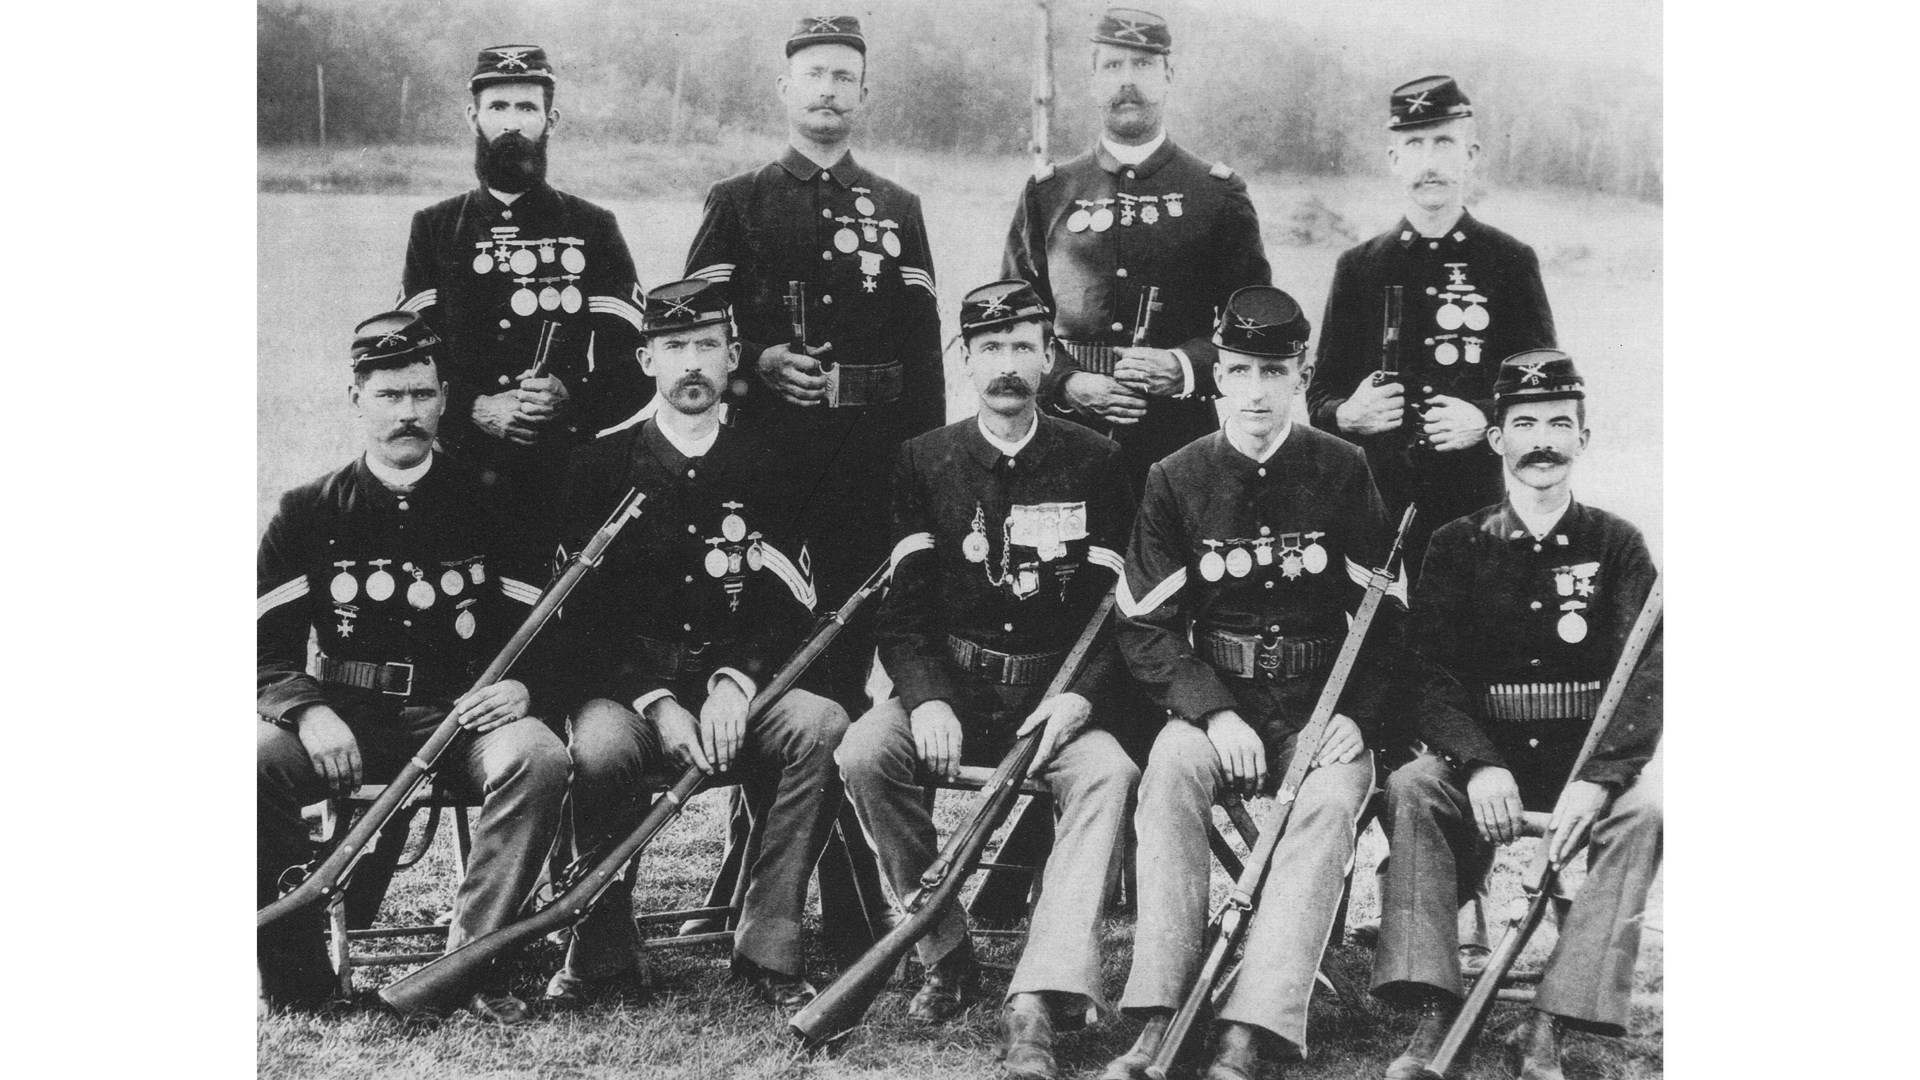 1889 U.S. Army Rifle Team with their Trapdoor Springfield Rifles. National Archives